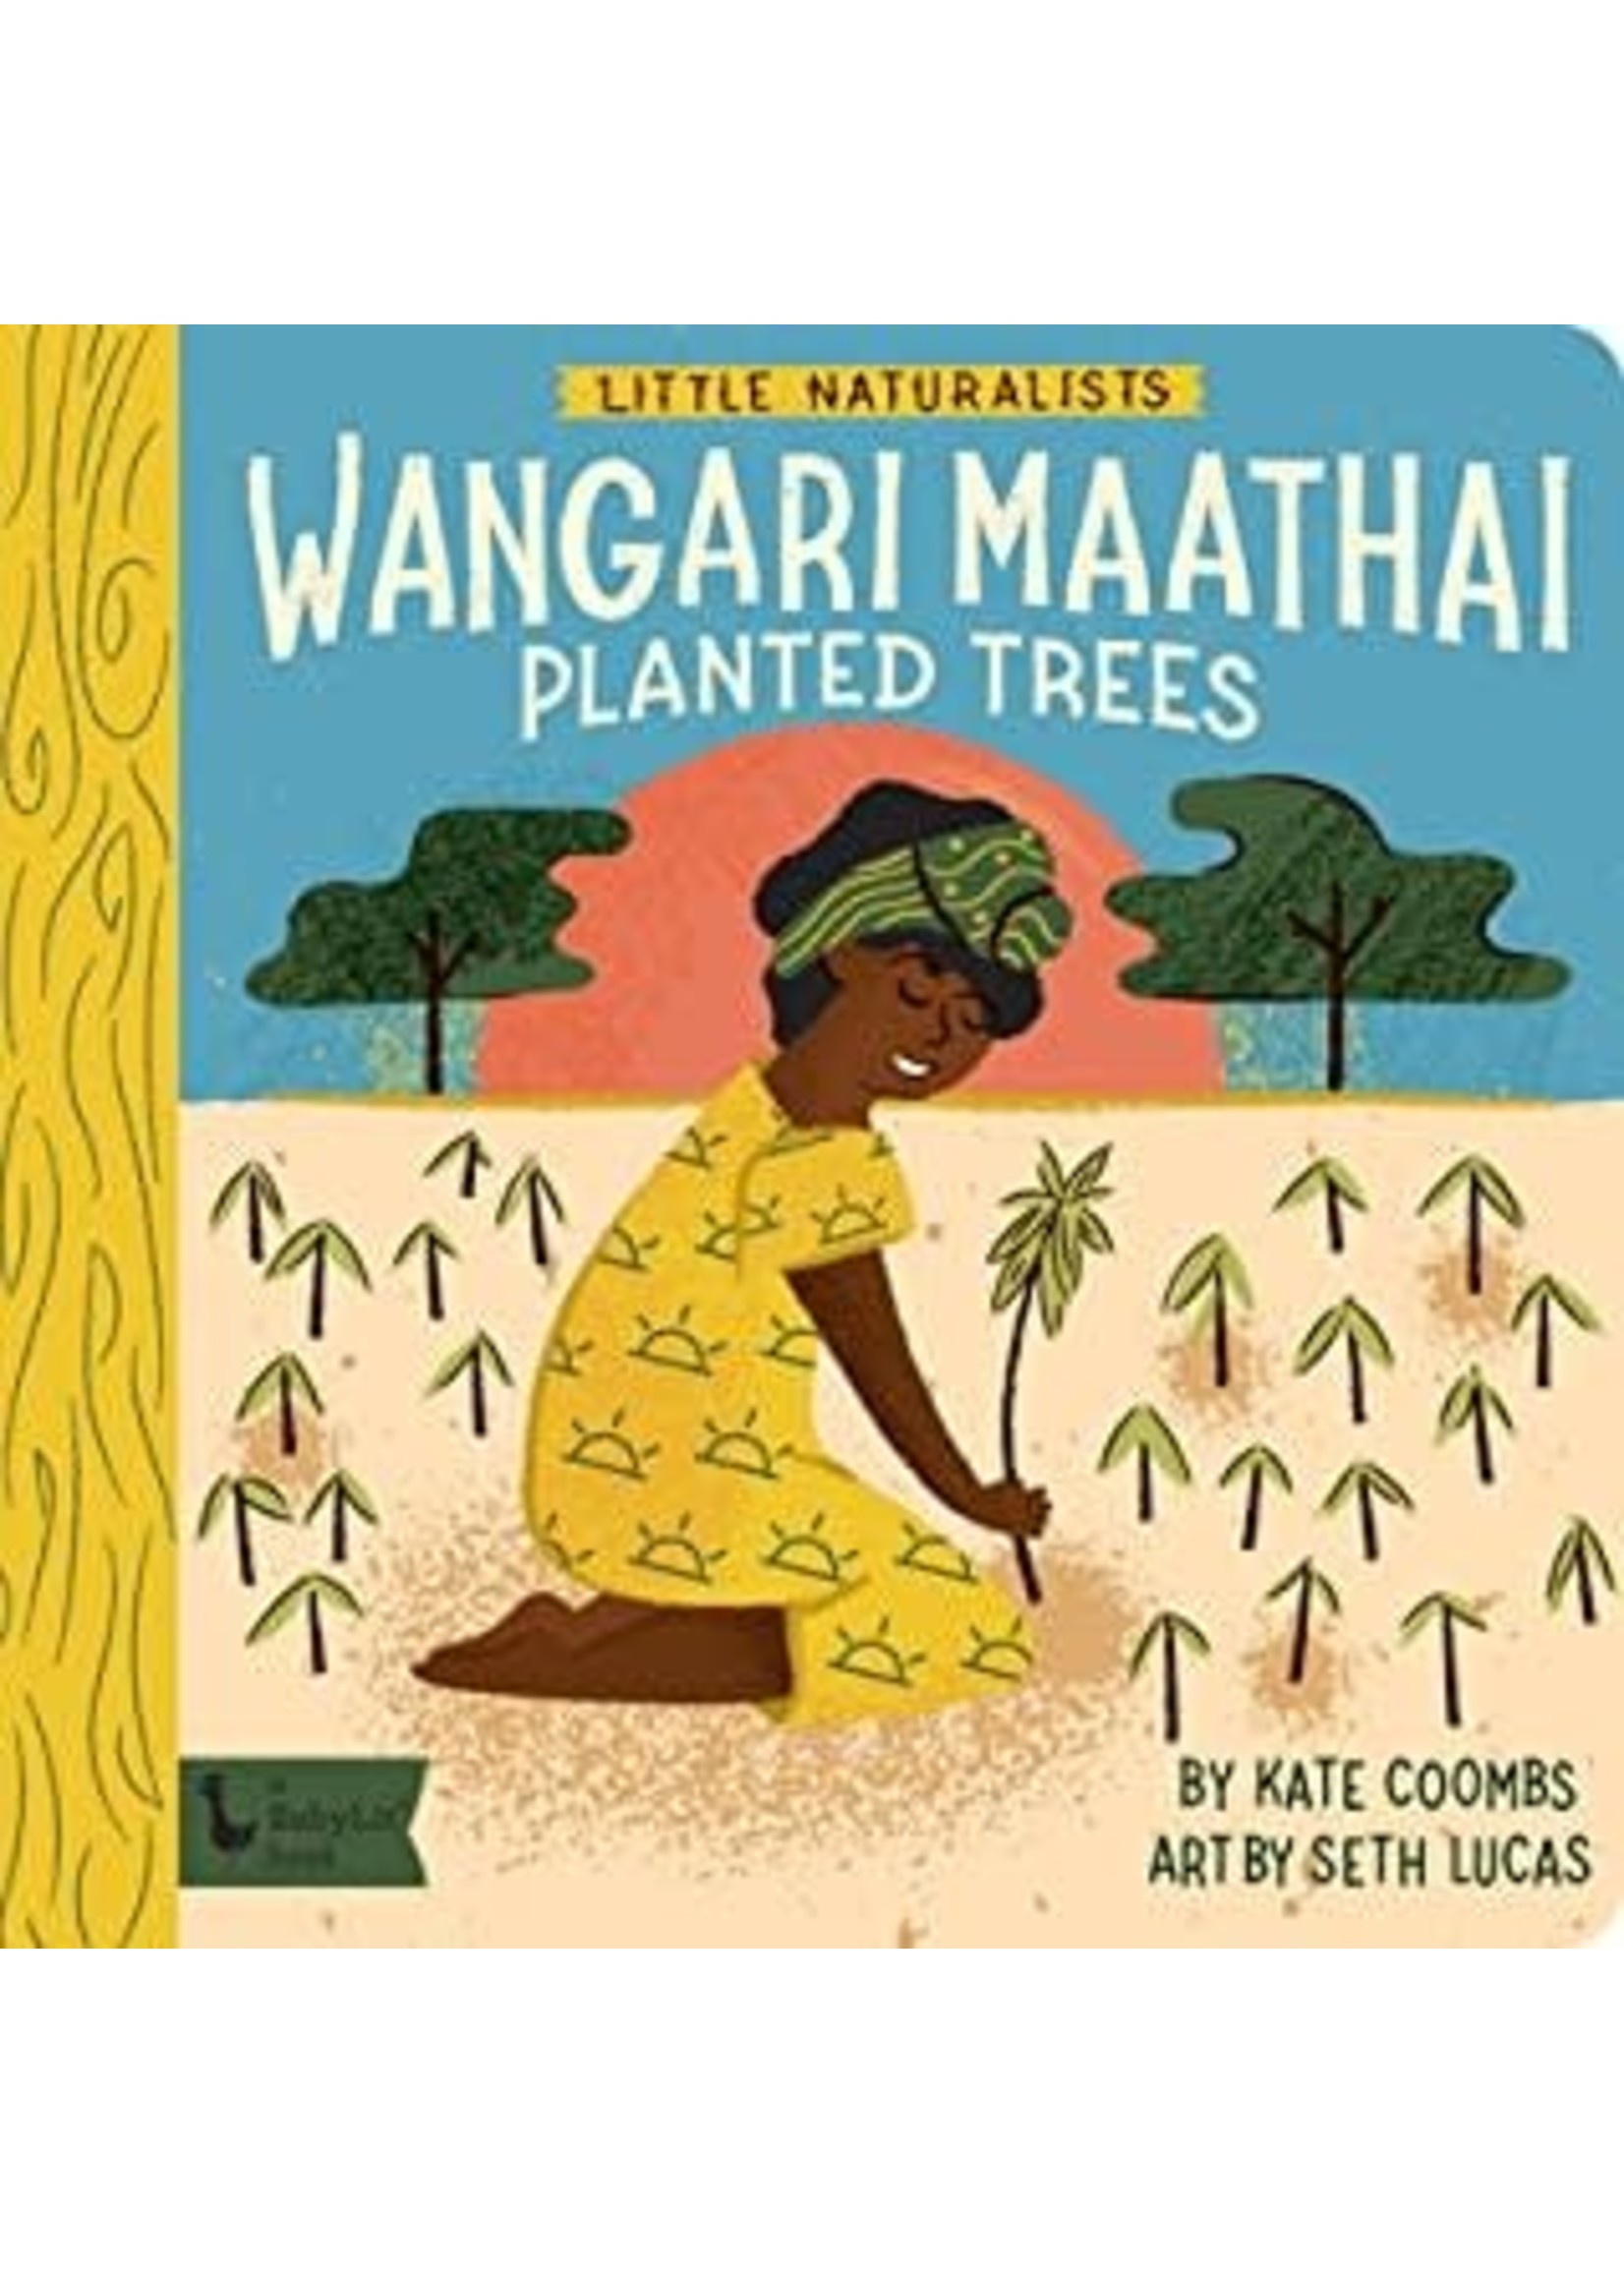 Little Naturalists: Wangari Maathai Planted Trees by Kate Coombs